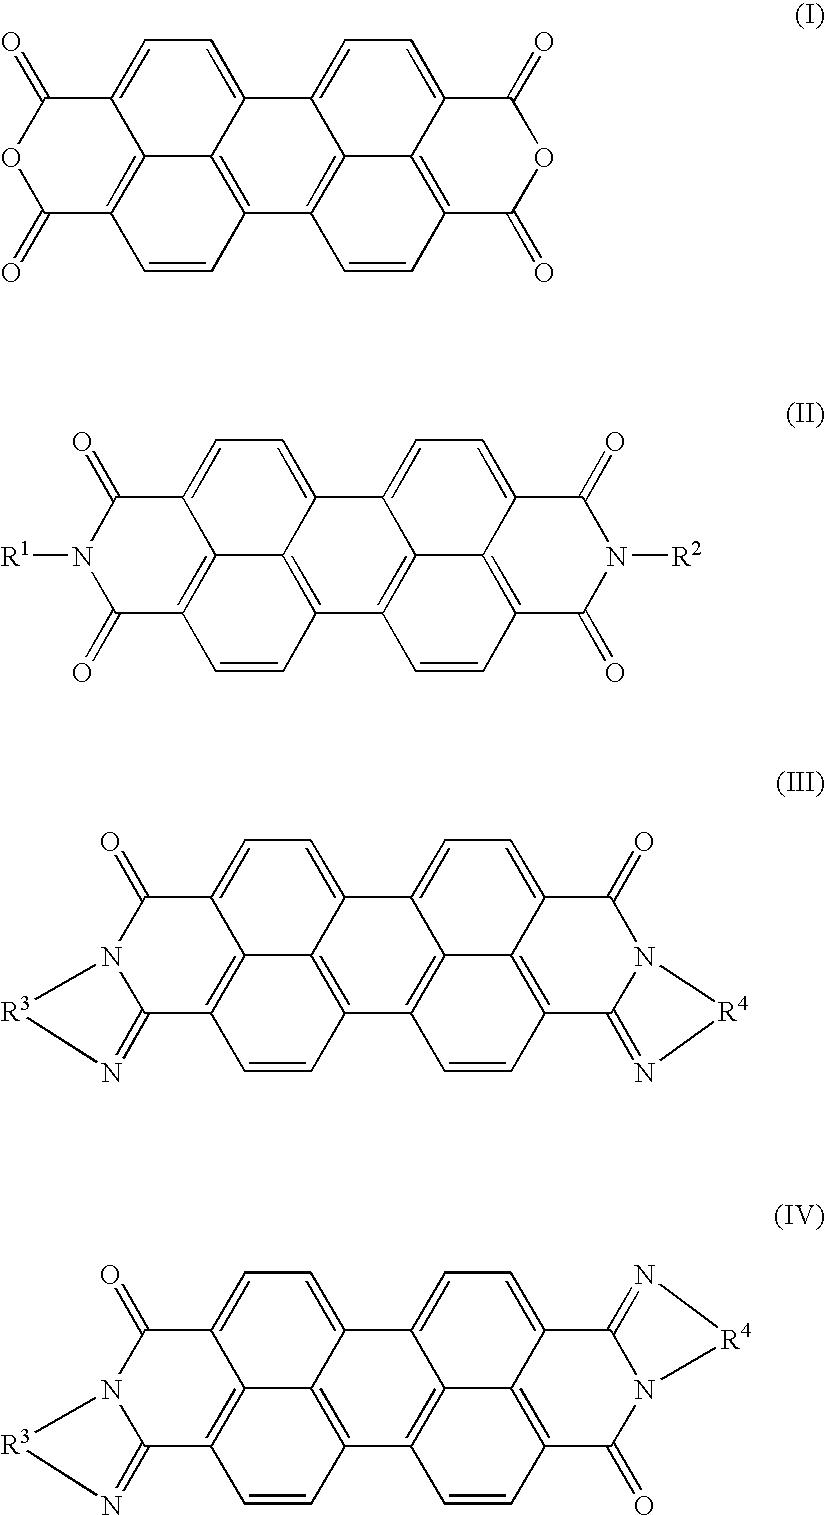 Black perylene-based pigment and process for producing the same